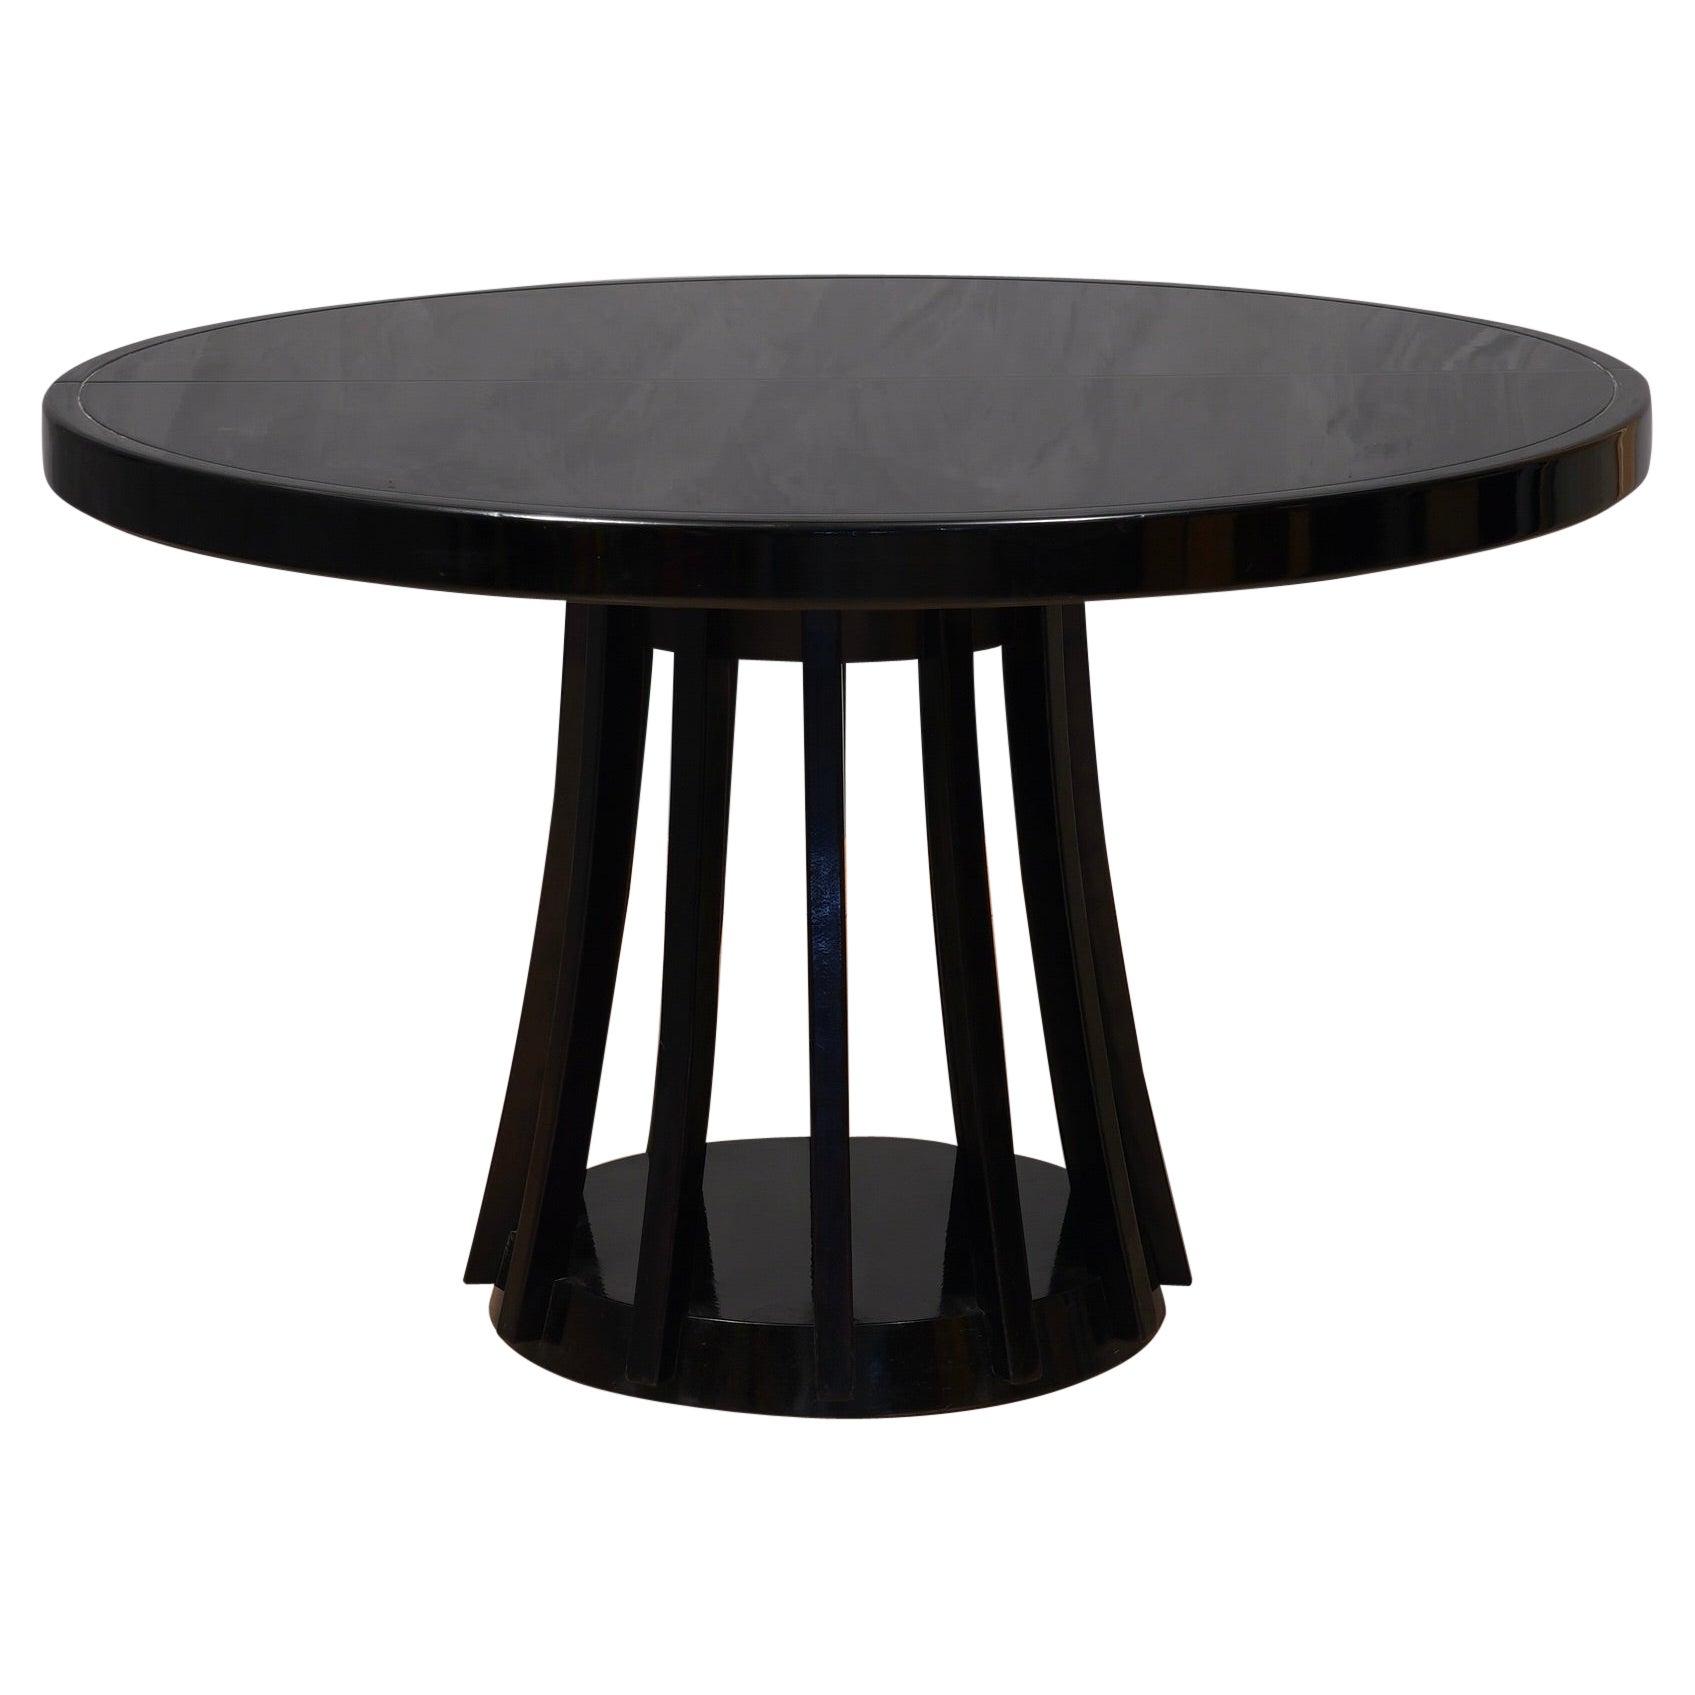 Mangiarotti Angelo Round Black Wood Dinning Table, 1970 For Sale